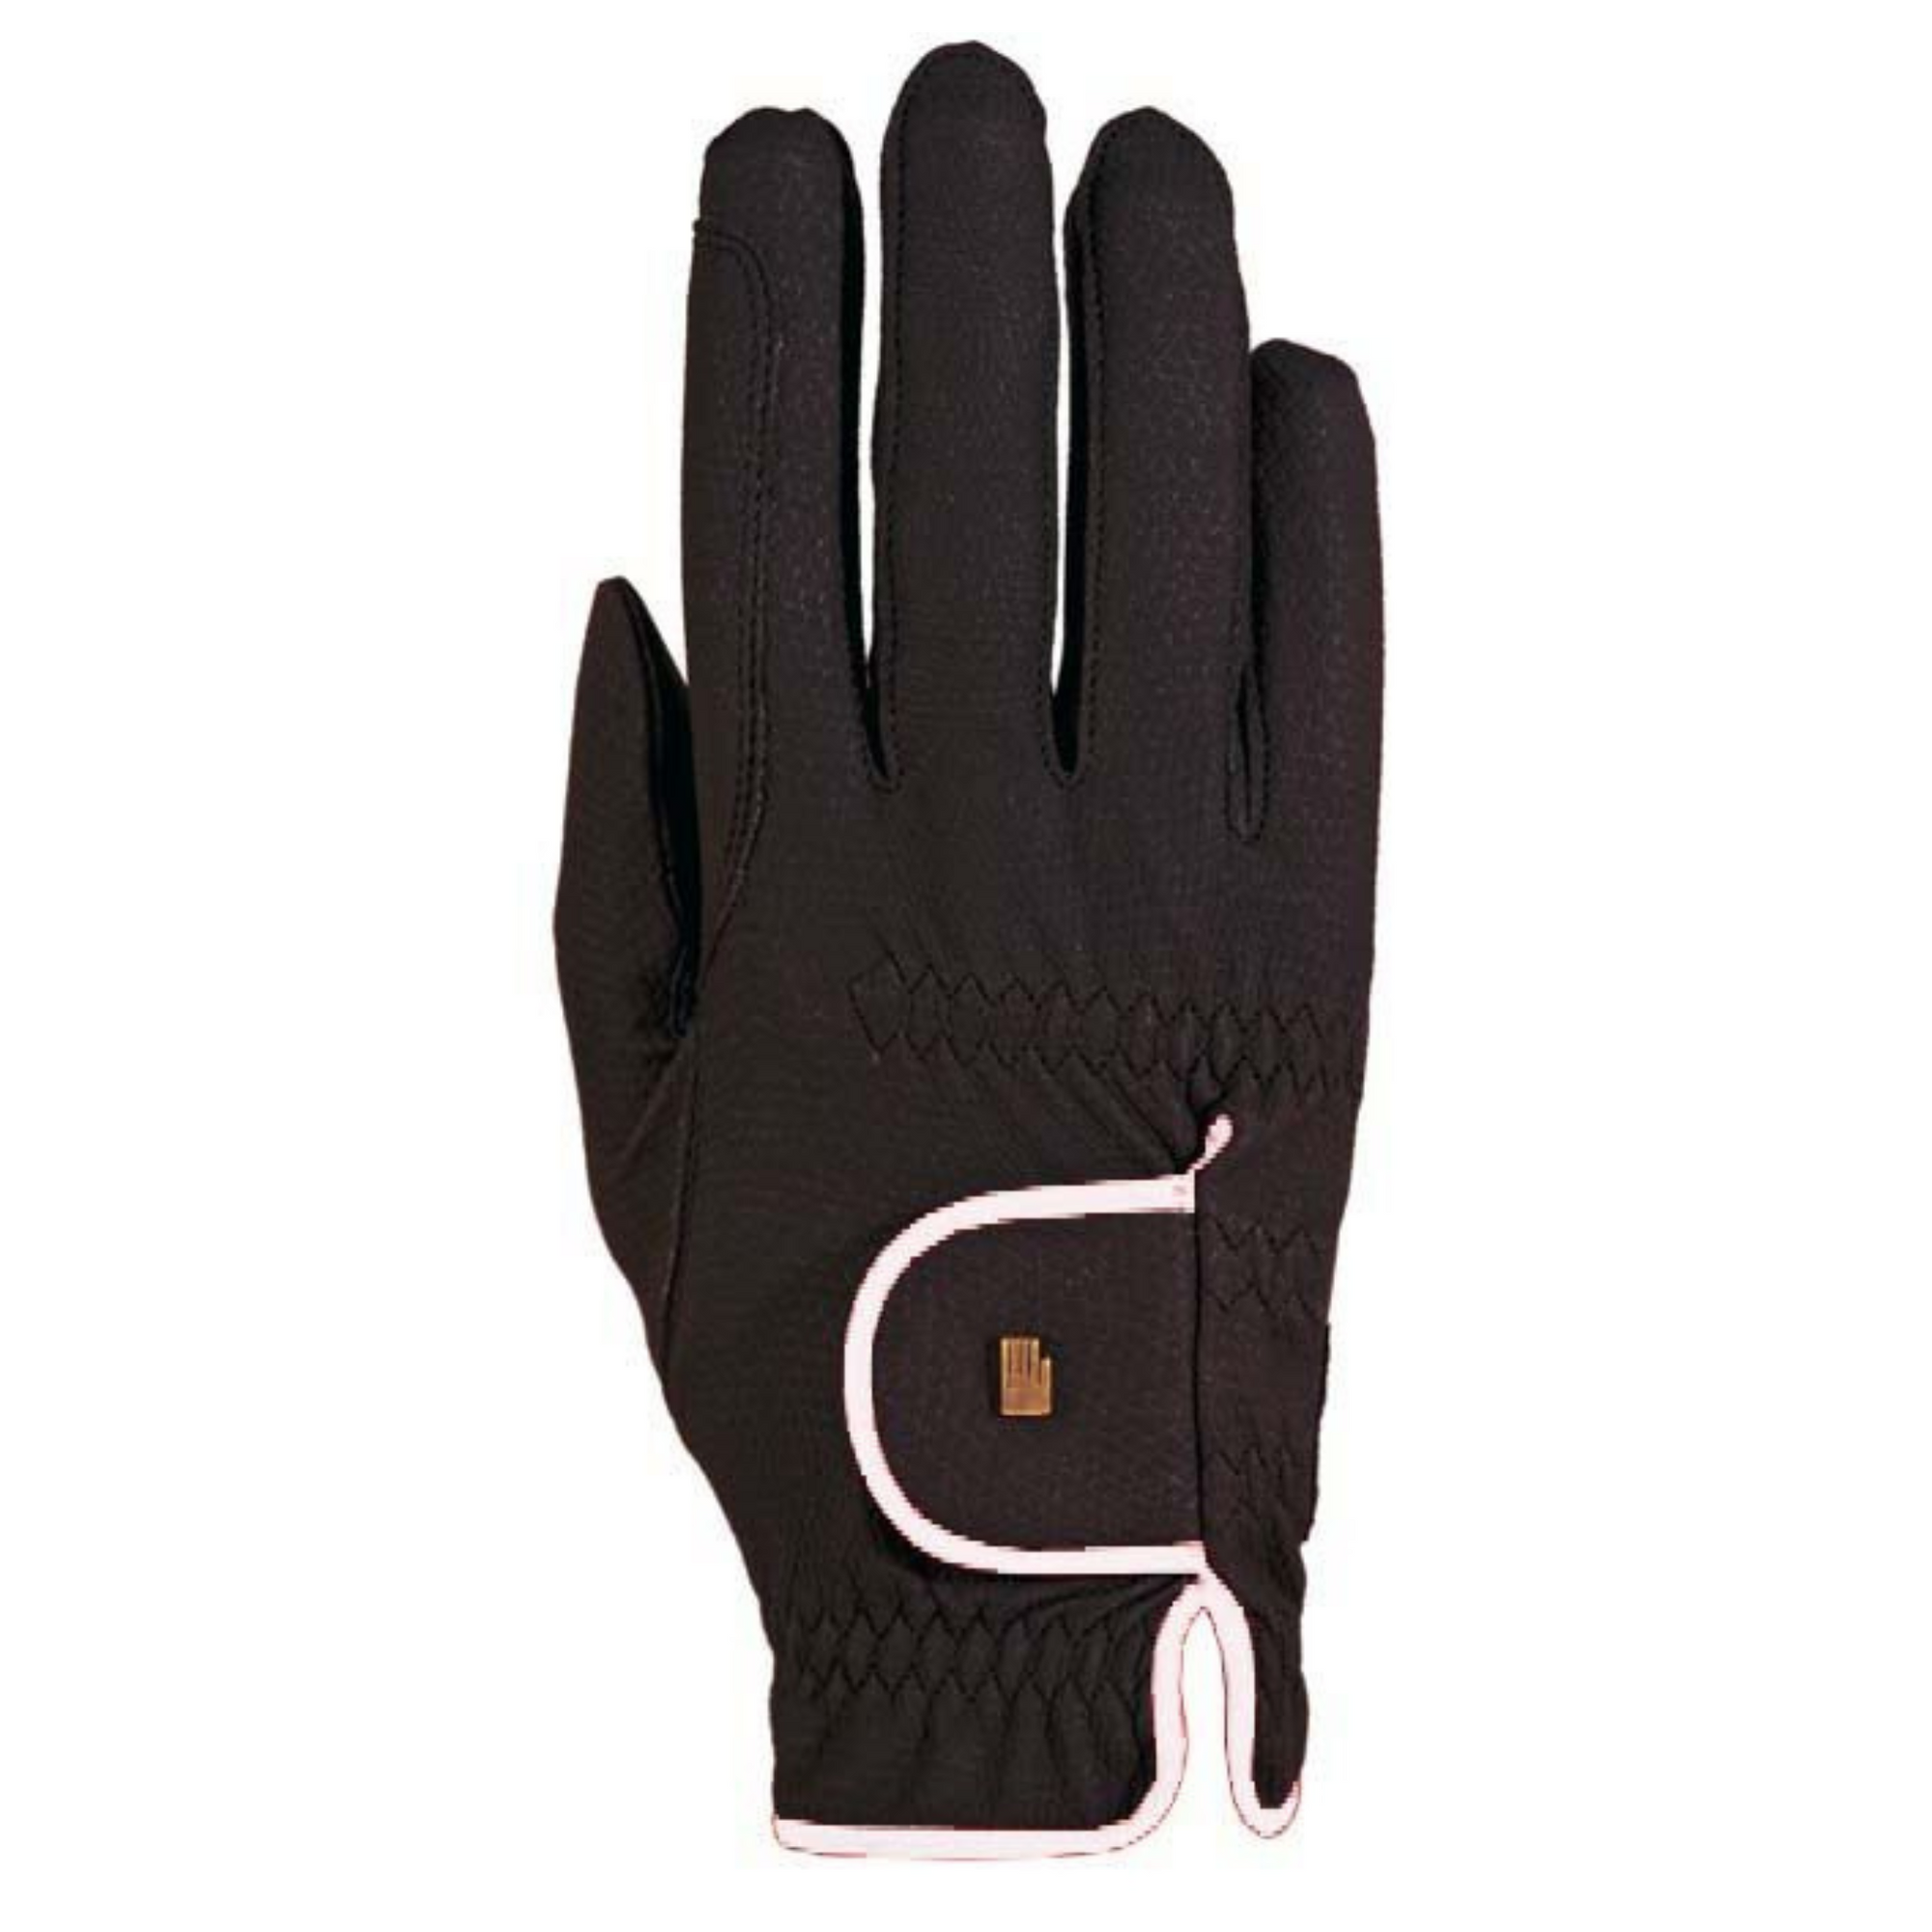 navy roeckl riding gloves with white binding